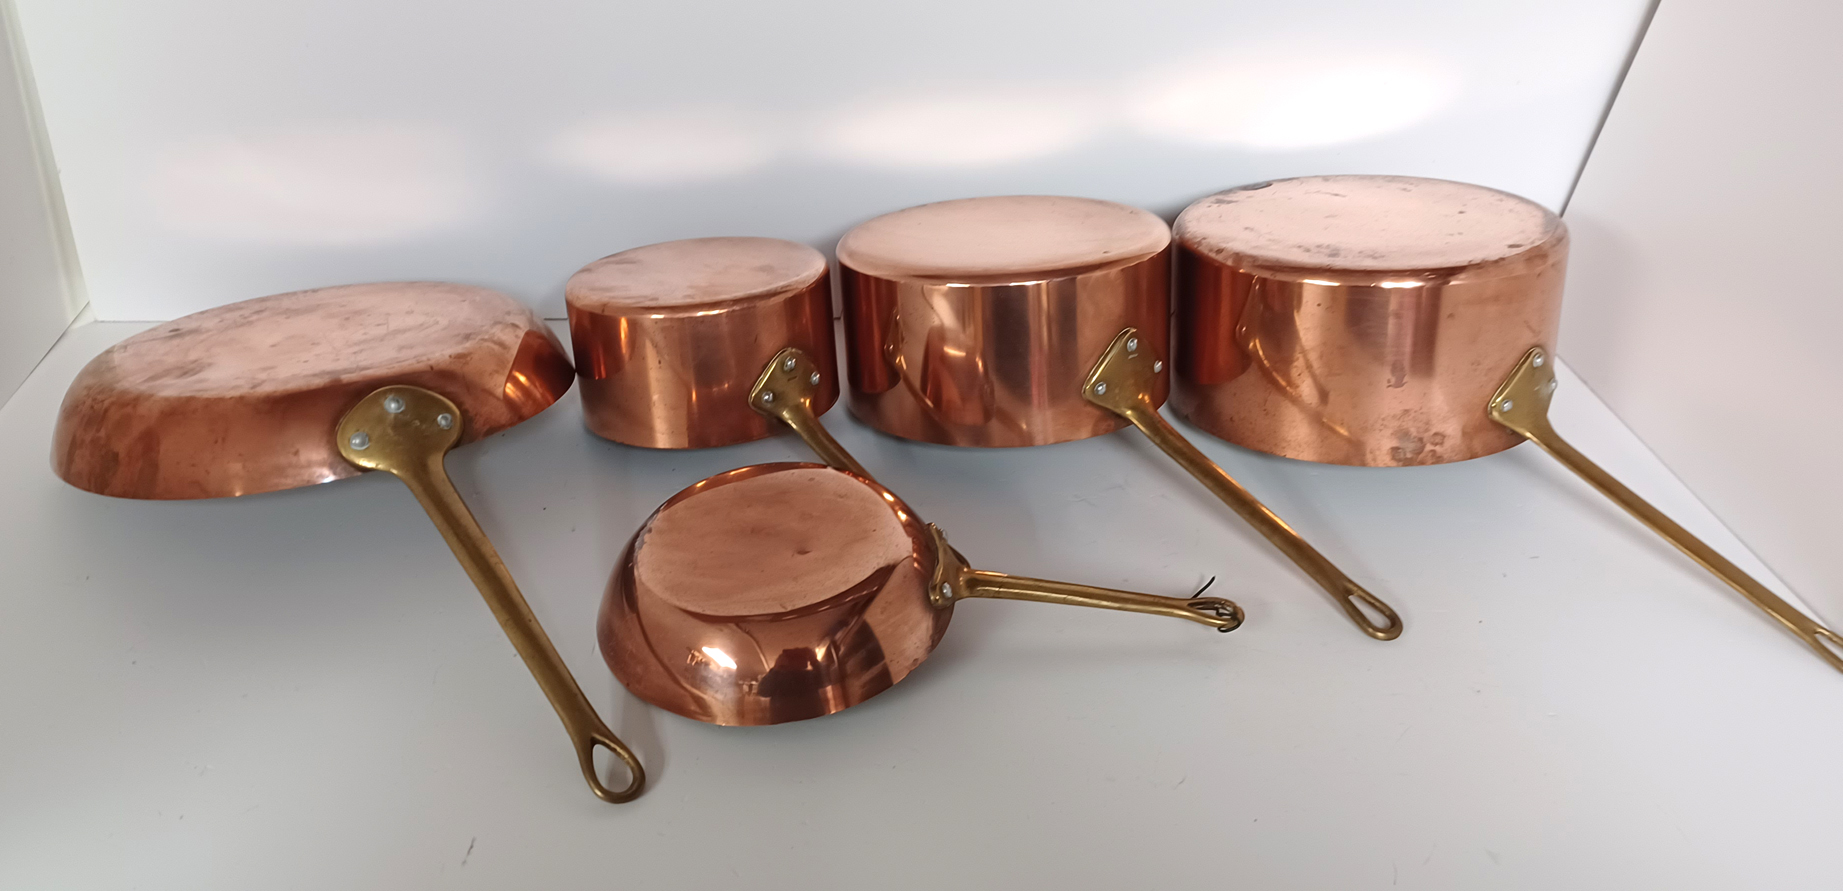 5 FRENCH LINED COPPER PANS